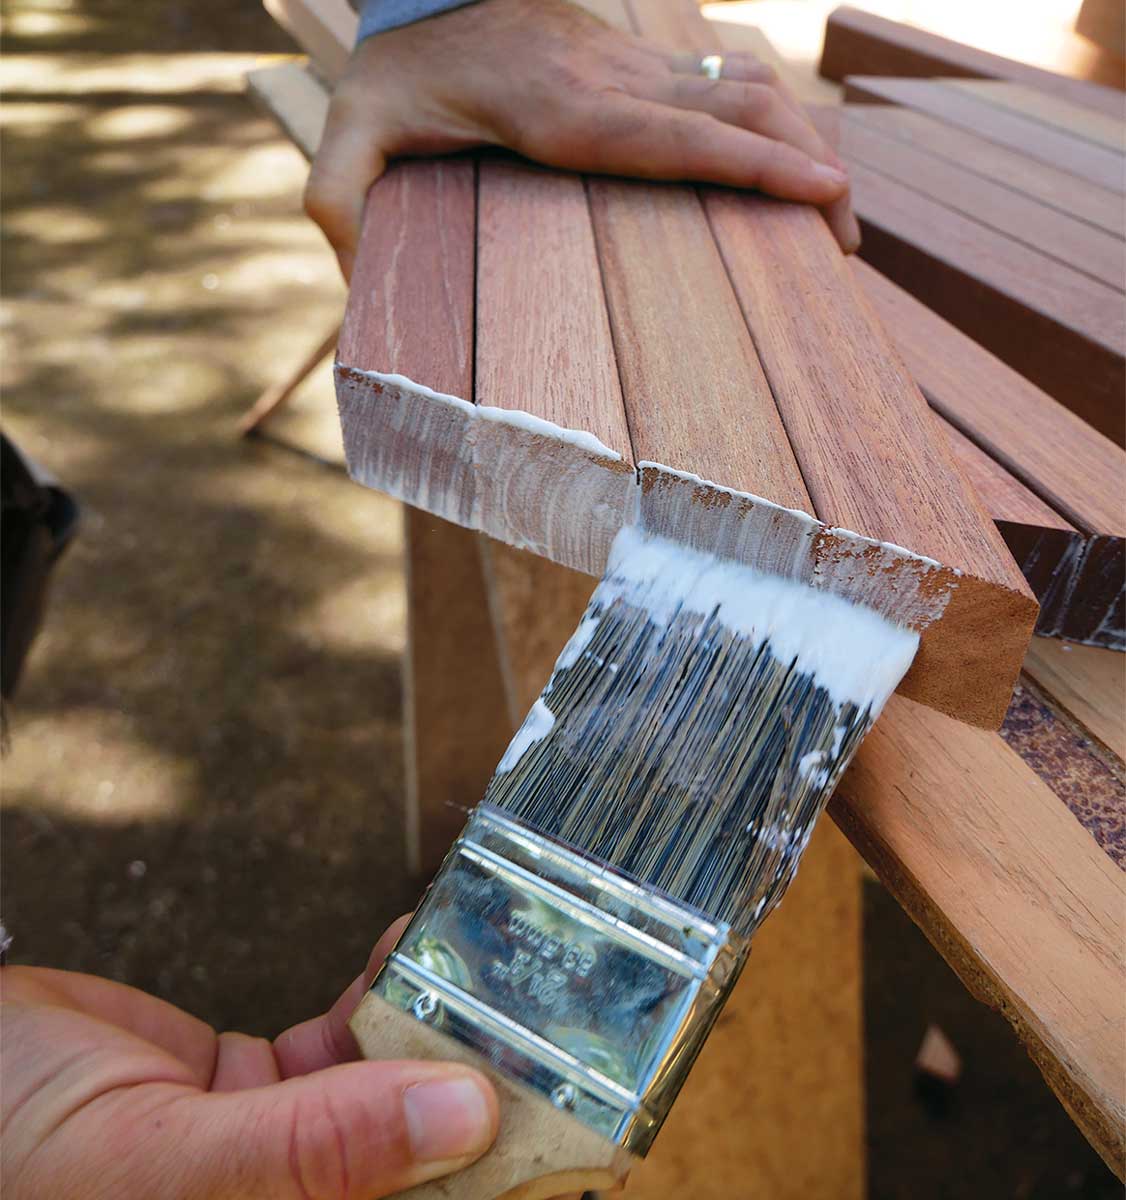 Bevel and seal the balusters. Cut the balusters to length (these balusters are 30 in. for a total 36-in.-high railing) using the same miter-saw setting used to bevel the rails. Butter the cut ends with a wax emulsion to prevent the end grain from taking on water, leading to rot.